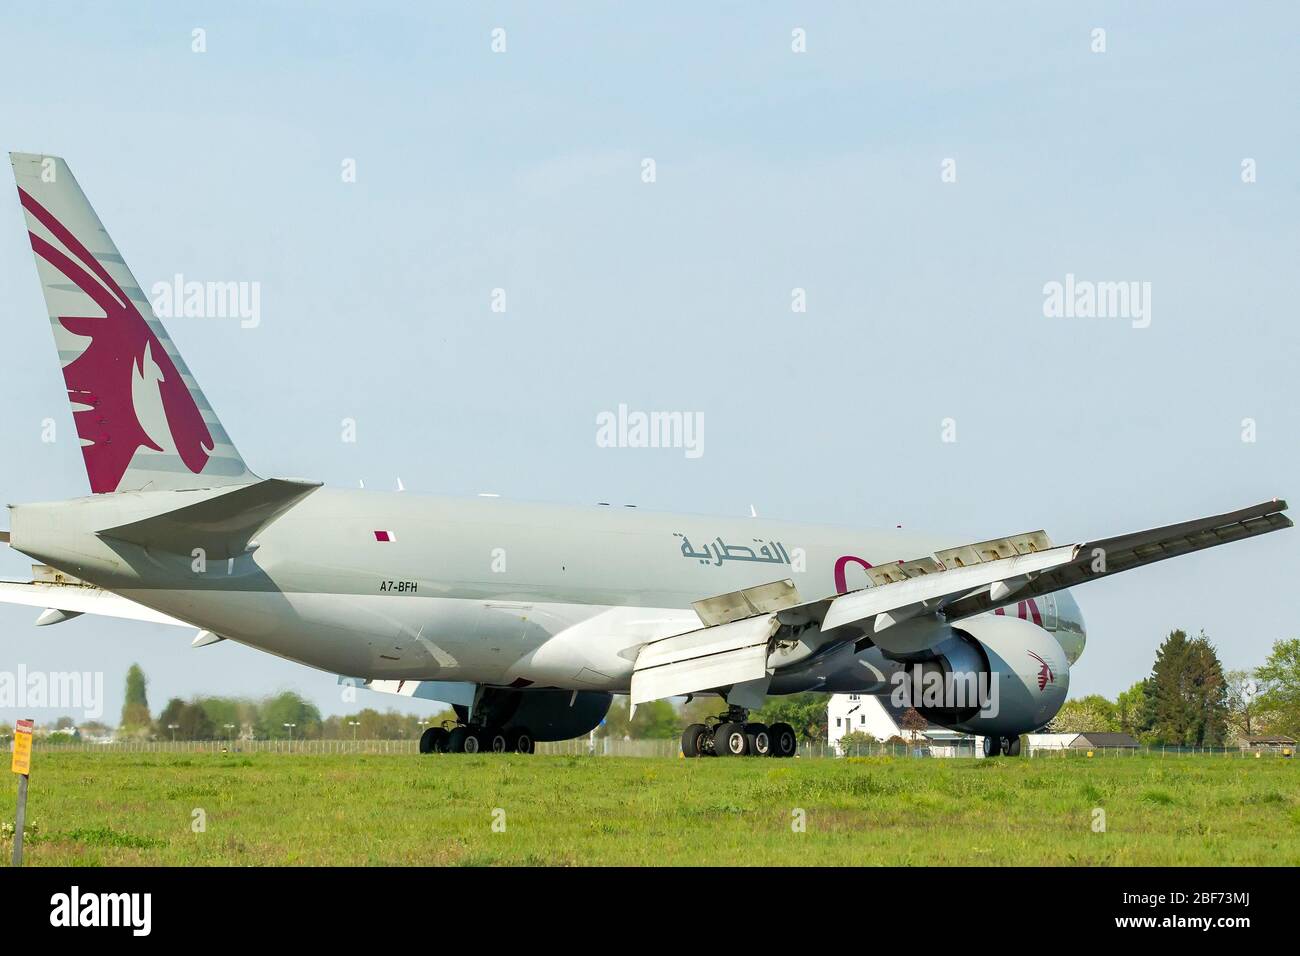 16 april 2020 Maastricht, The Netherlands Airplanes leaving the Airport Qatar cargo vliegtuig A7-BFH  Qatar cargo plane A7-BFH Stock Photo